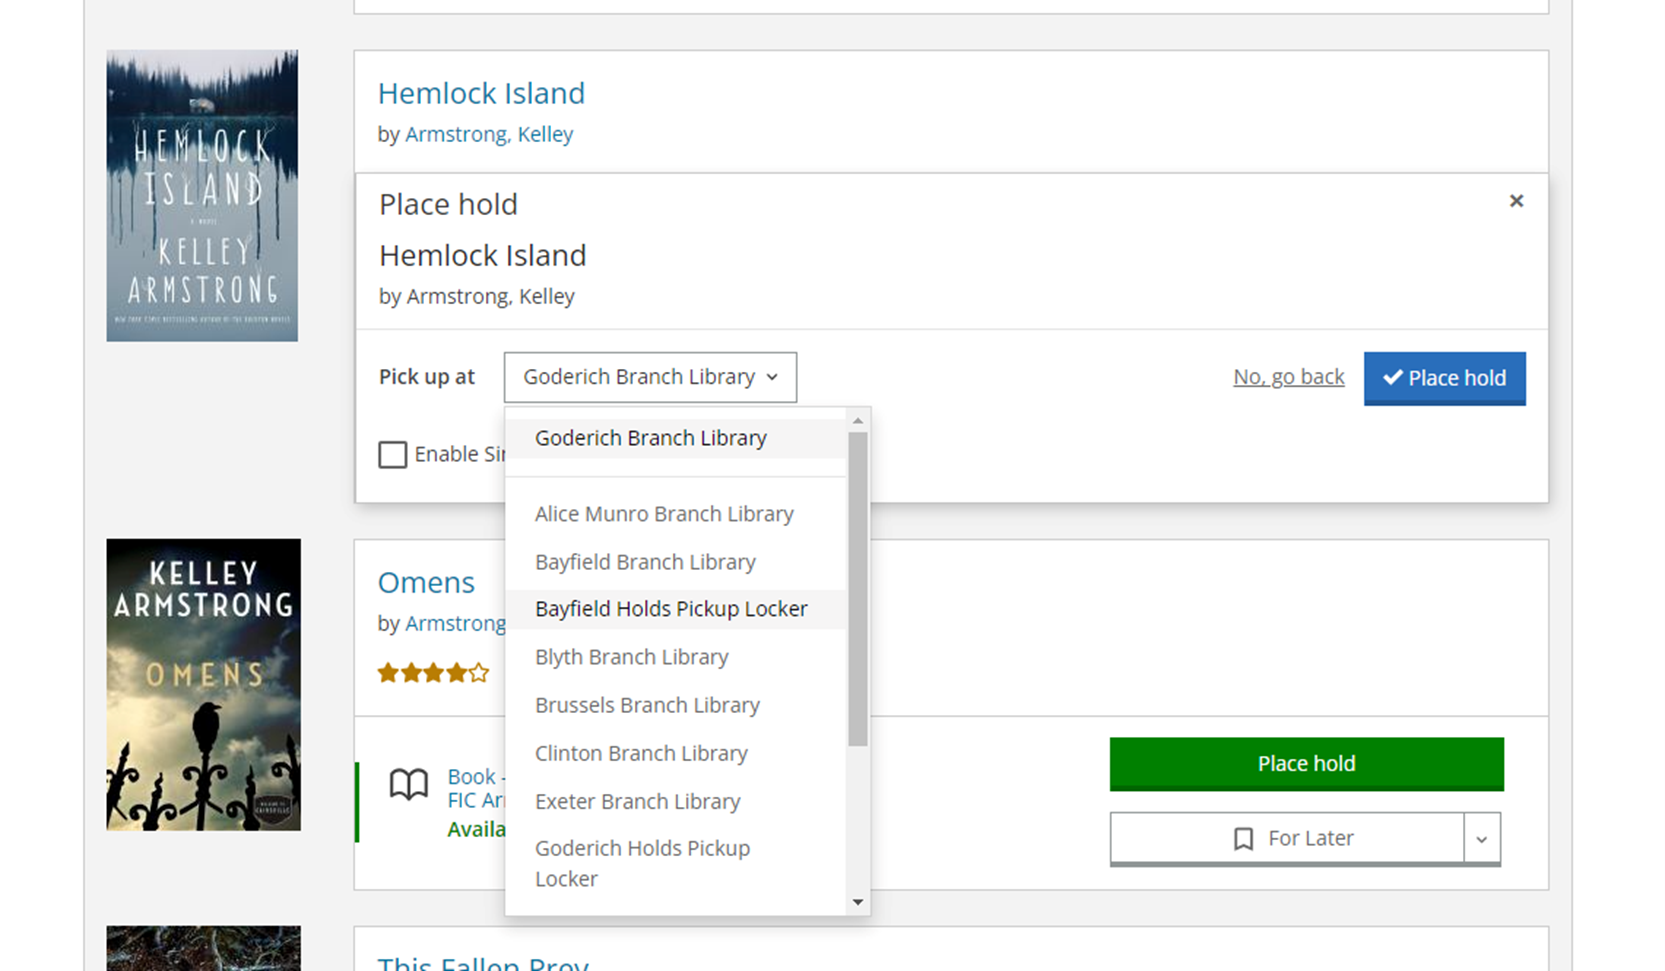 Image of the library's online catalogue showing how to select one of the lockers as a pick-up location